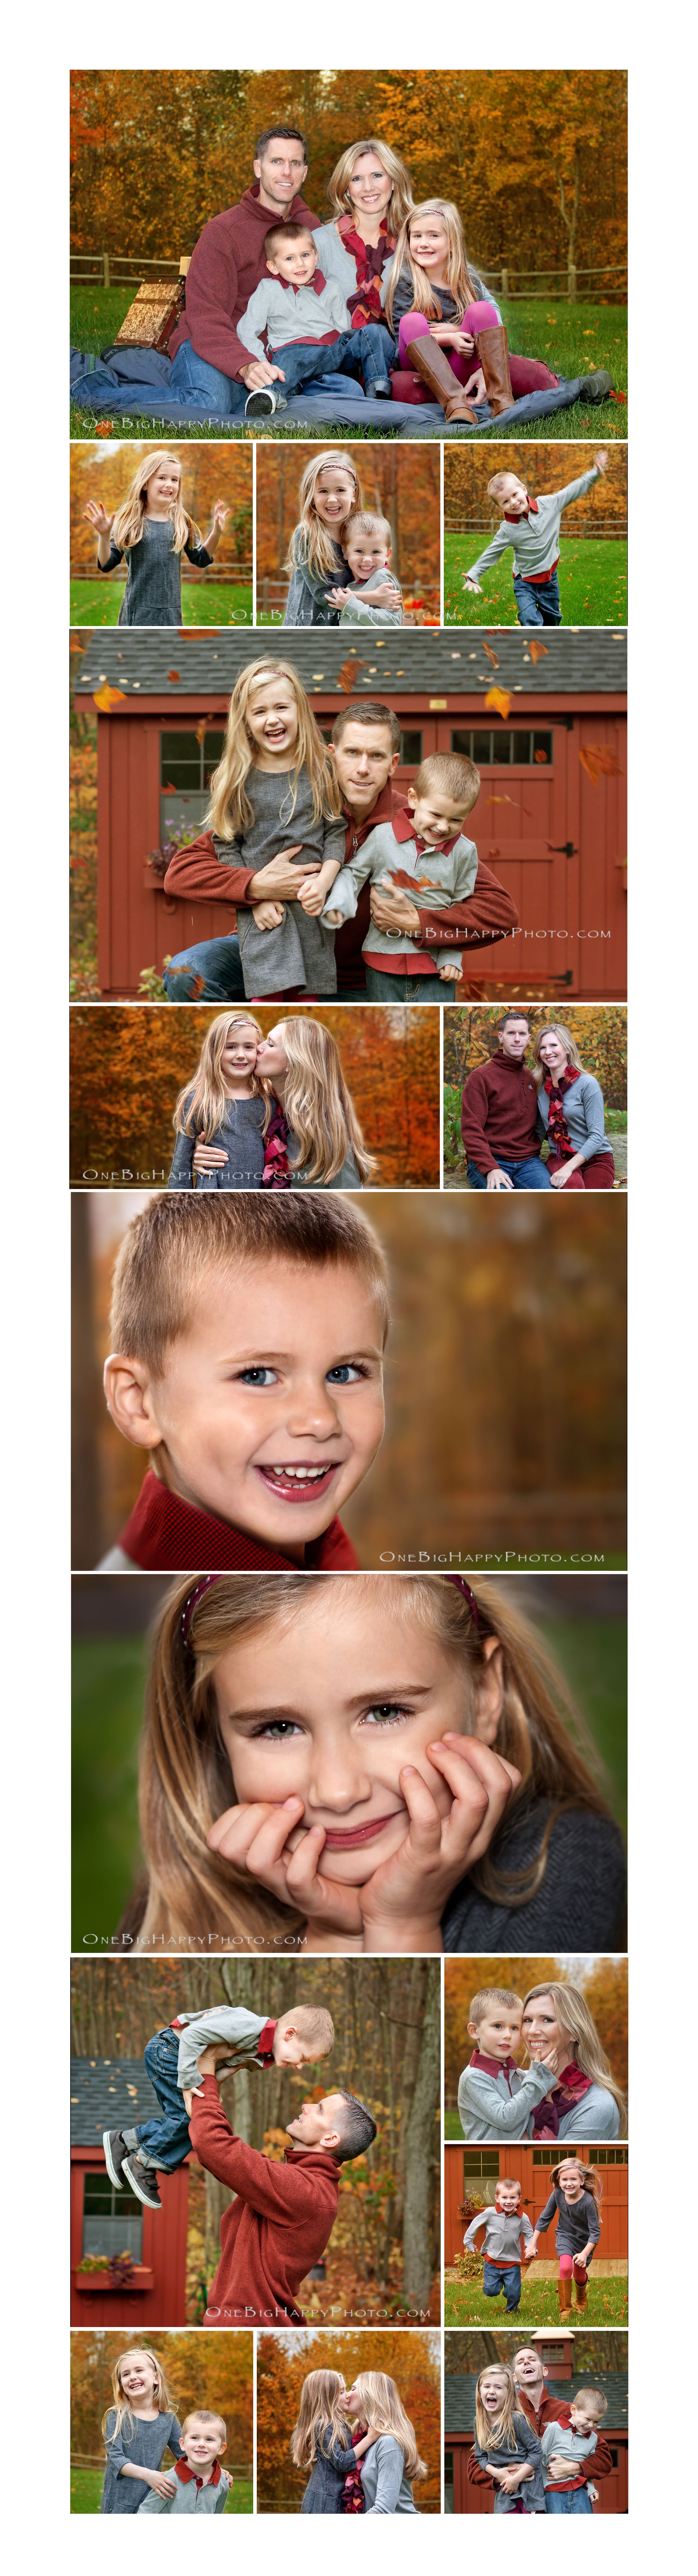 Mom, Dad, young son and young daughter family photos in the fall leaves while it was raining